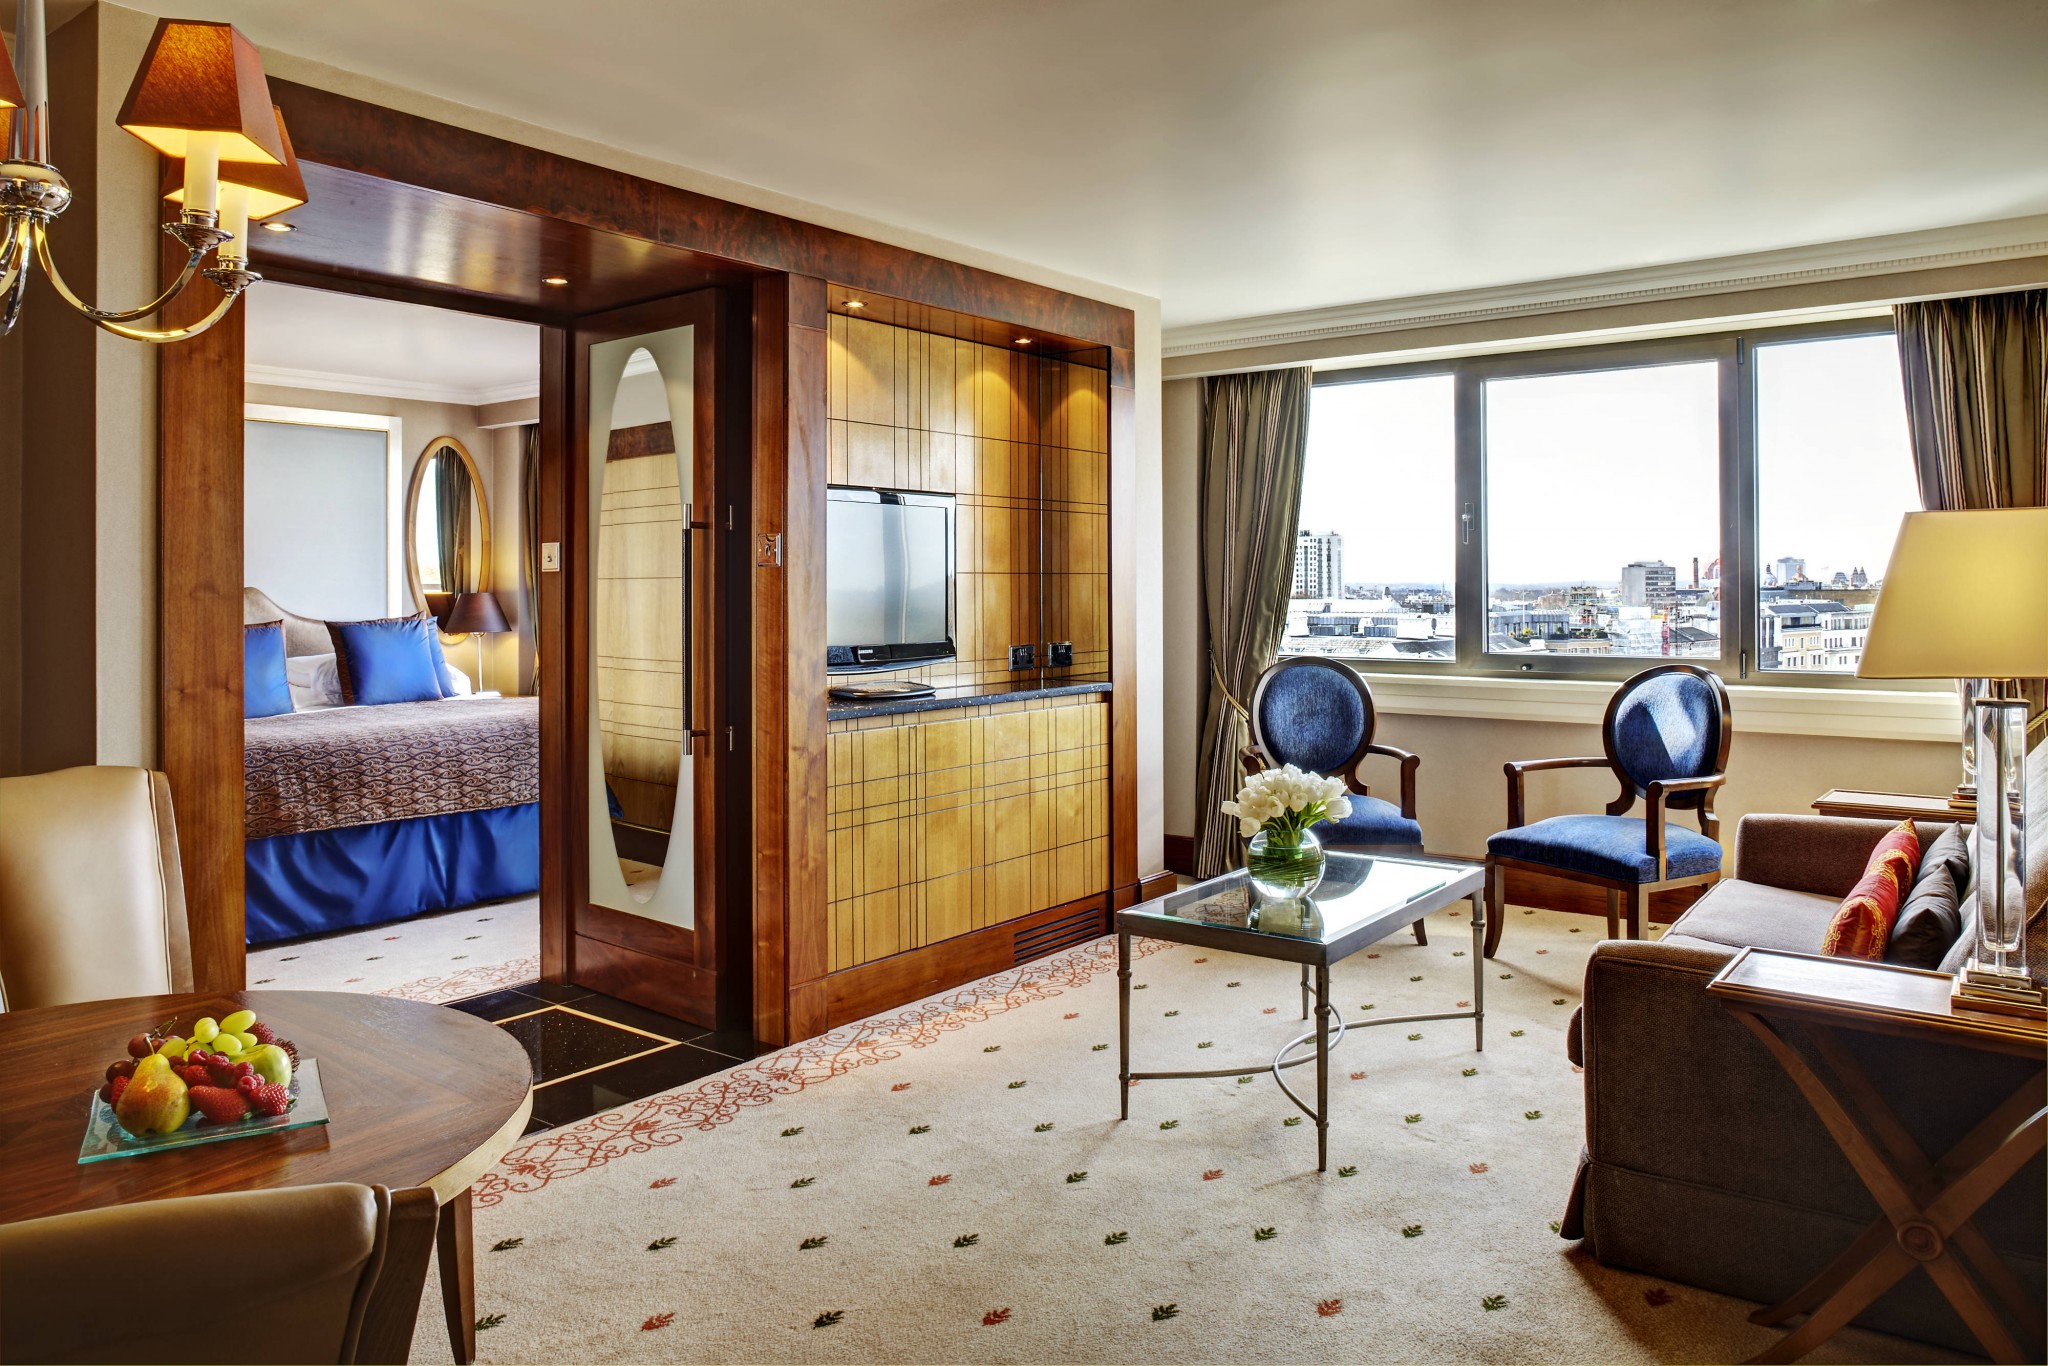 InterContinental London Park Lane, a Hotel Partner of The Luxury Travel Agency